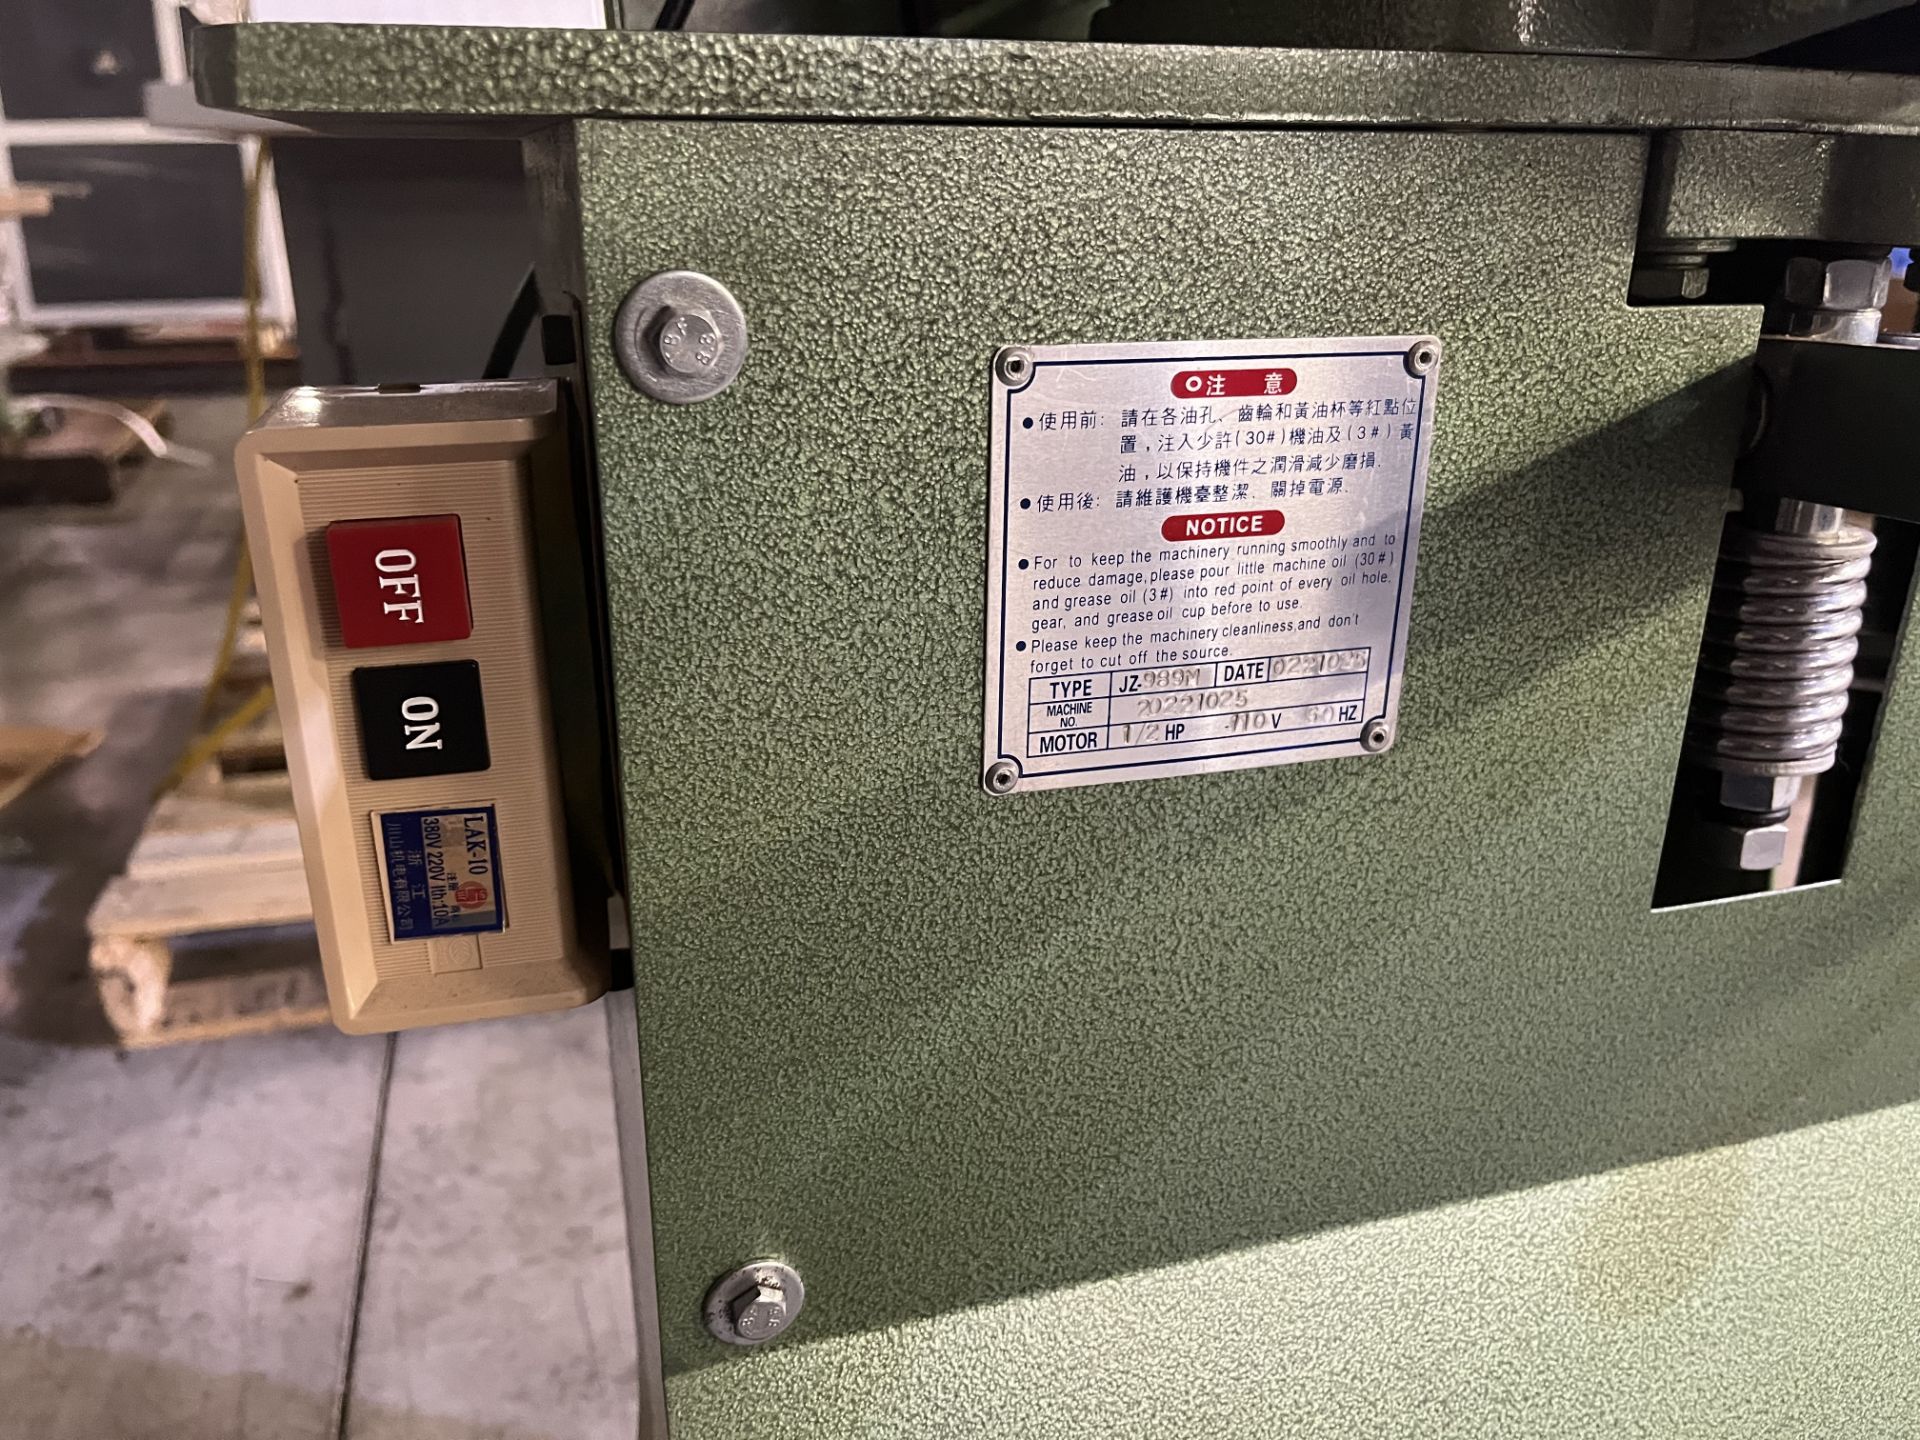 Jiuzhou Machinery Model JZ-989M Automatic Riveting Machine in Good, Working Condition S/N - Image 6 of 6